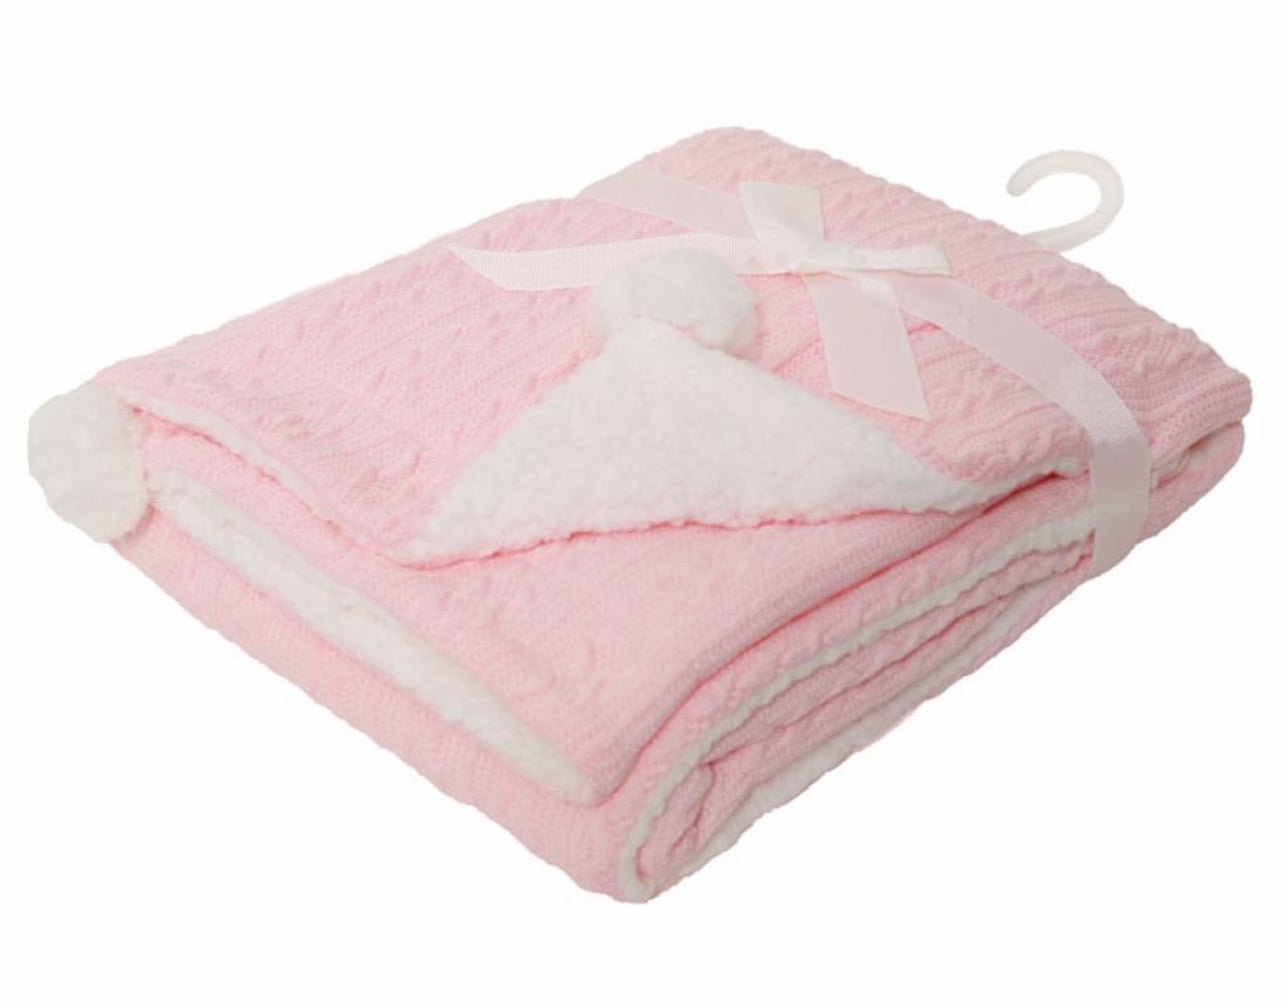 Cable knit sherpa Pom Pom blanket - Baby pink